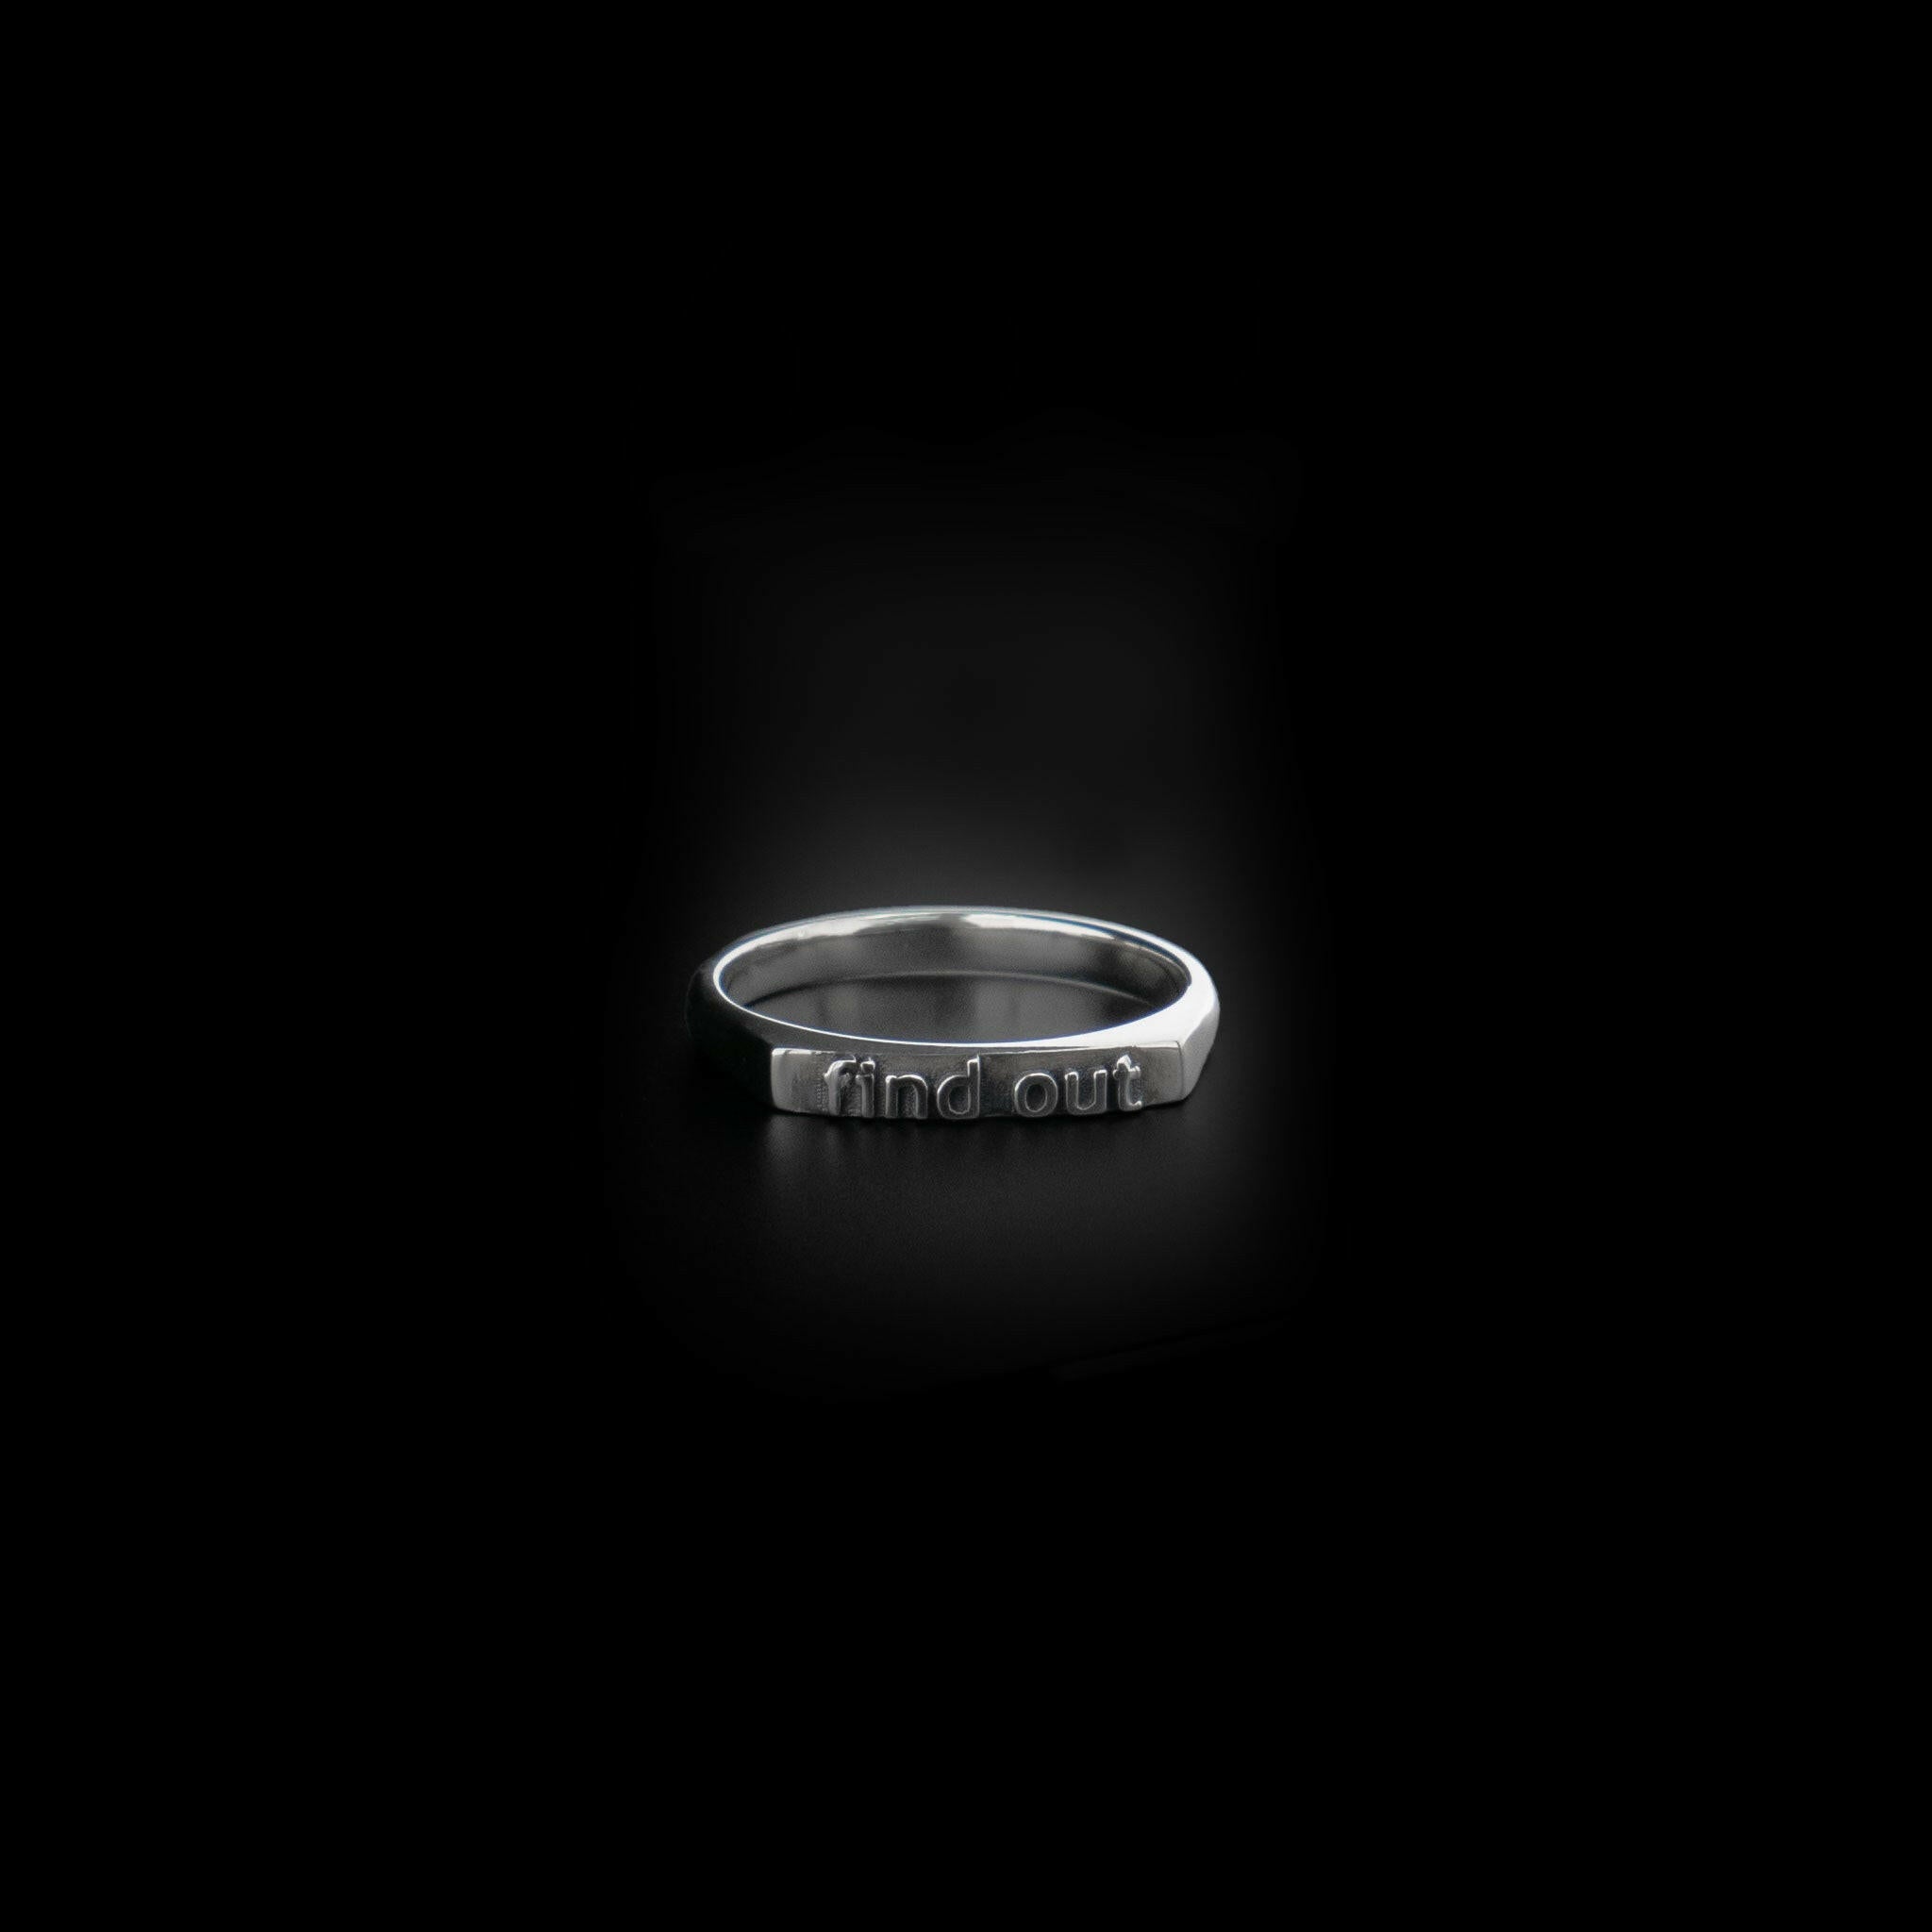 front view of a sterling silver ring with text saying "find out"